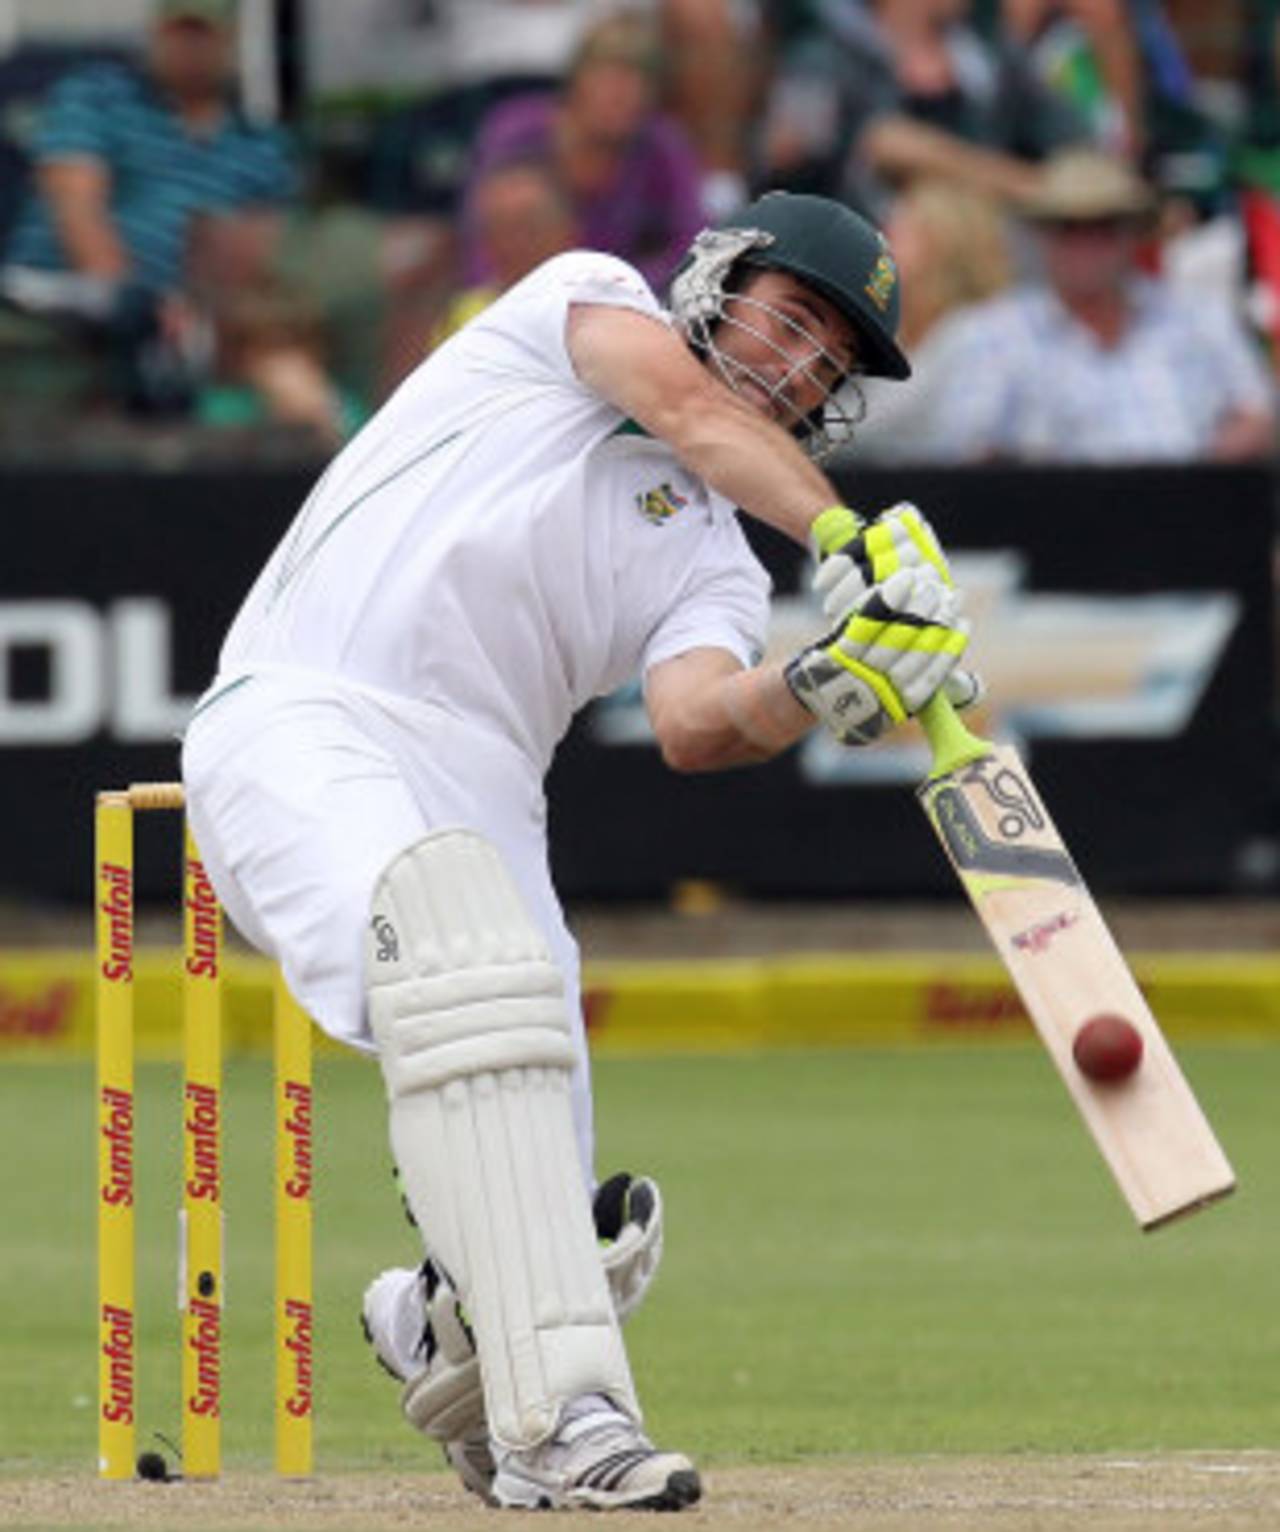 Dean Elgar made his first significant score in Test cricket, South Africa v New Zealand, 2nd Test, Port Elizabeth, 2nd day, January 12, 2013